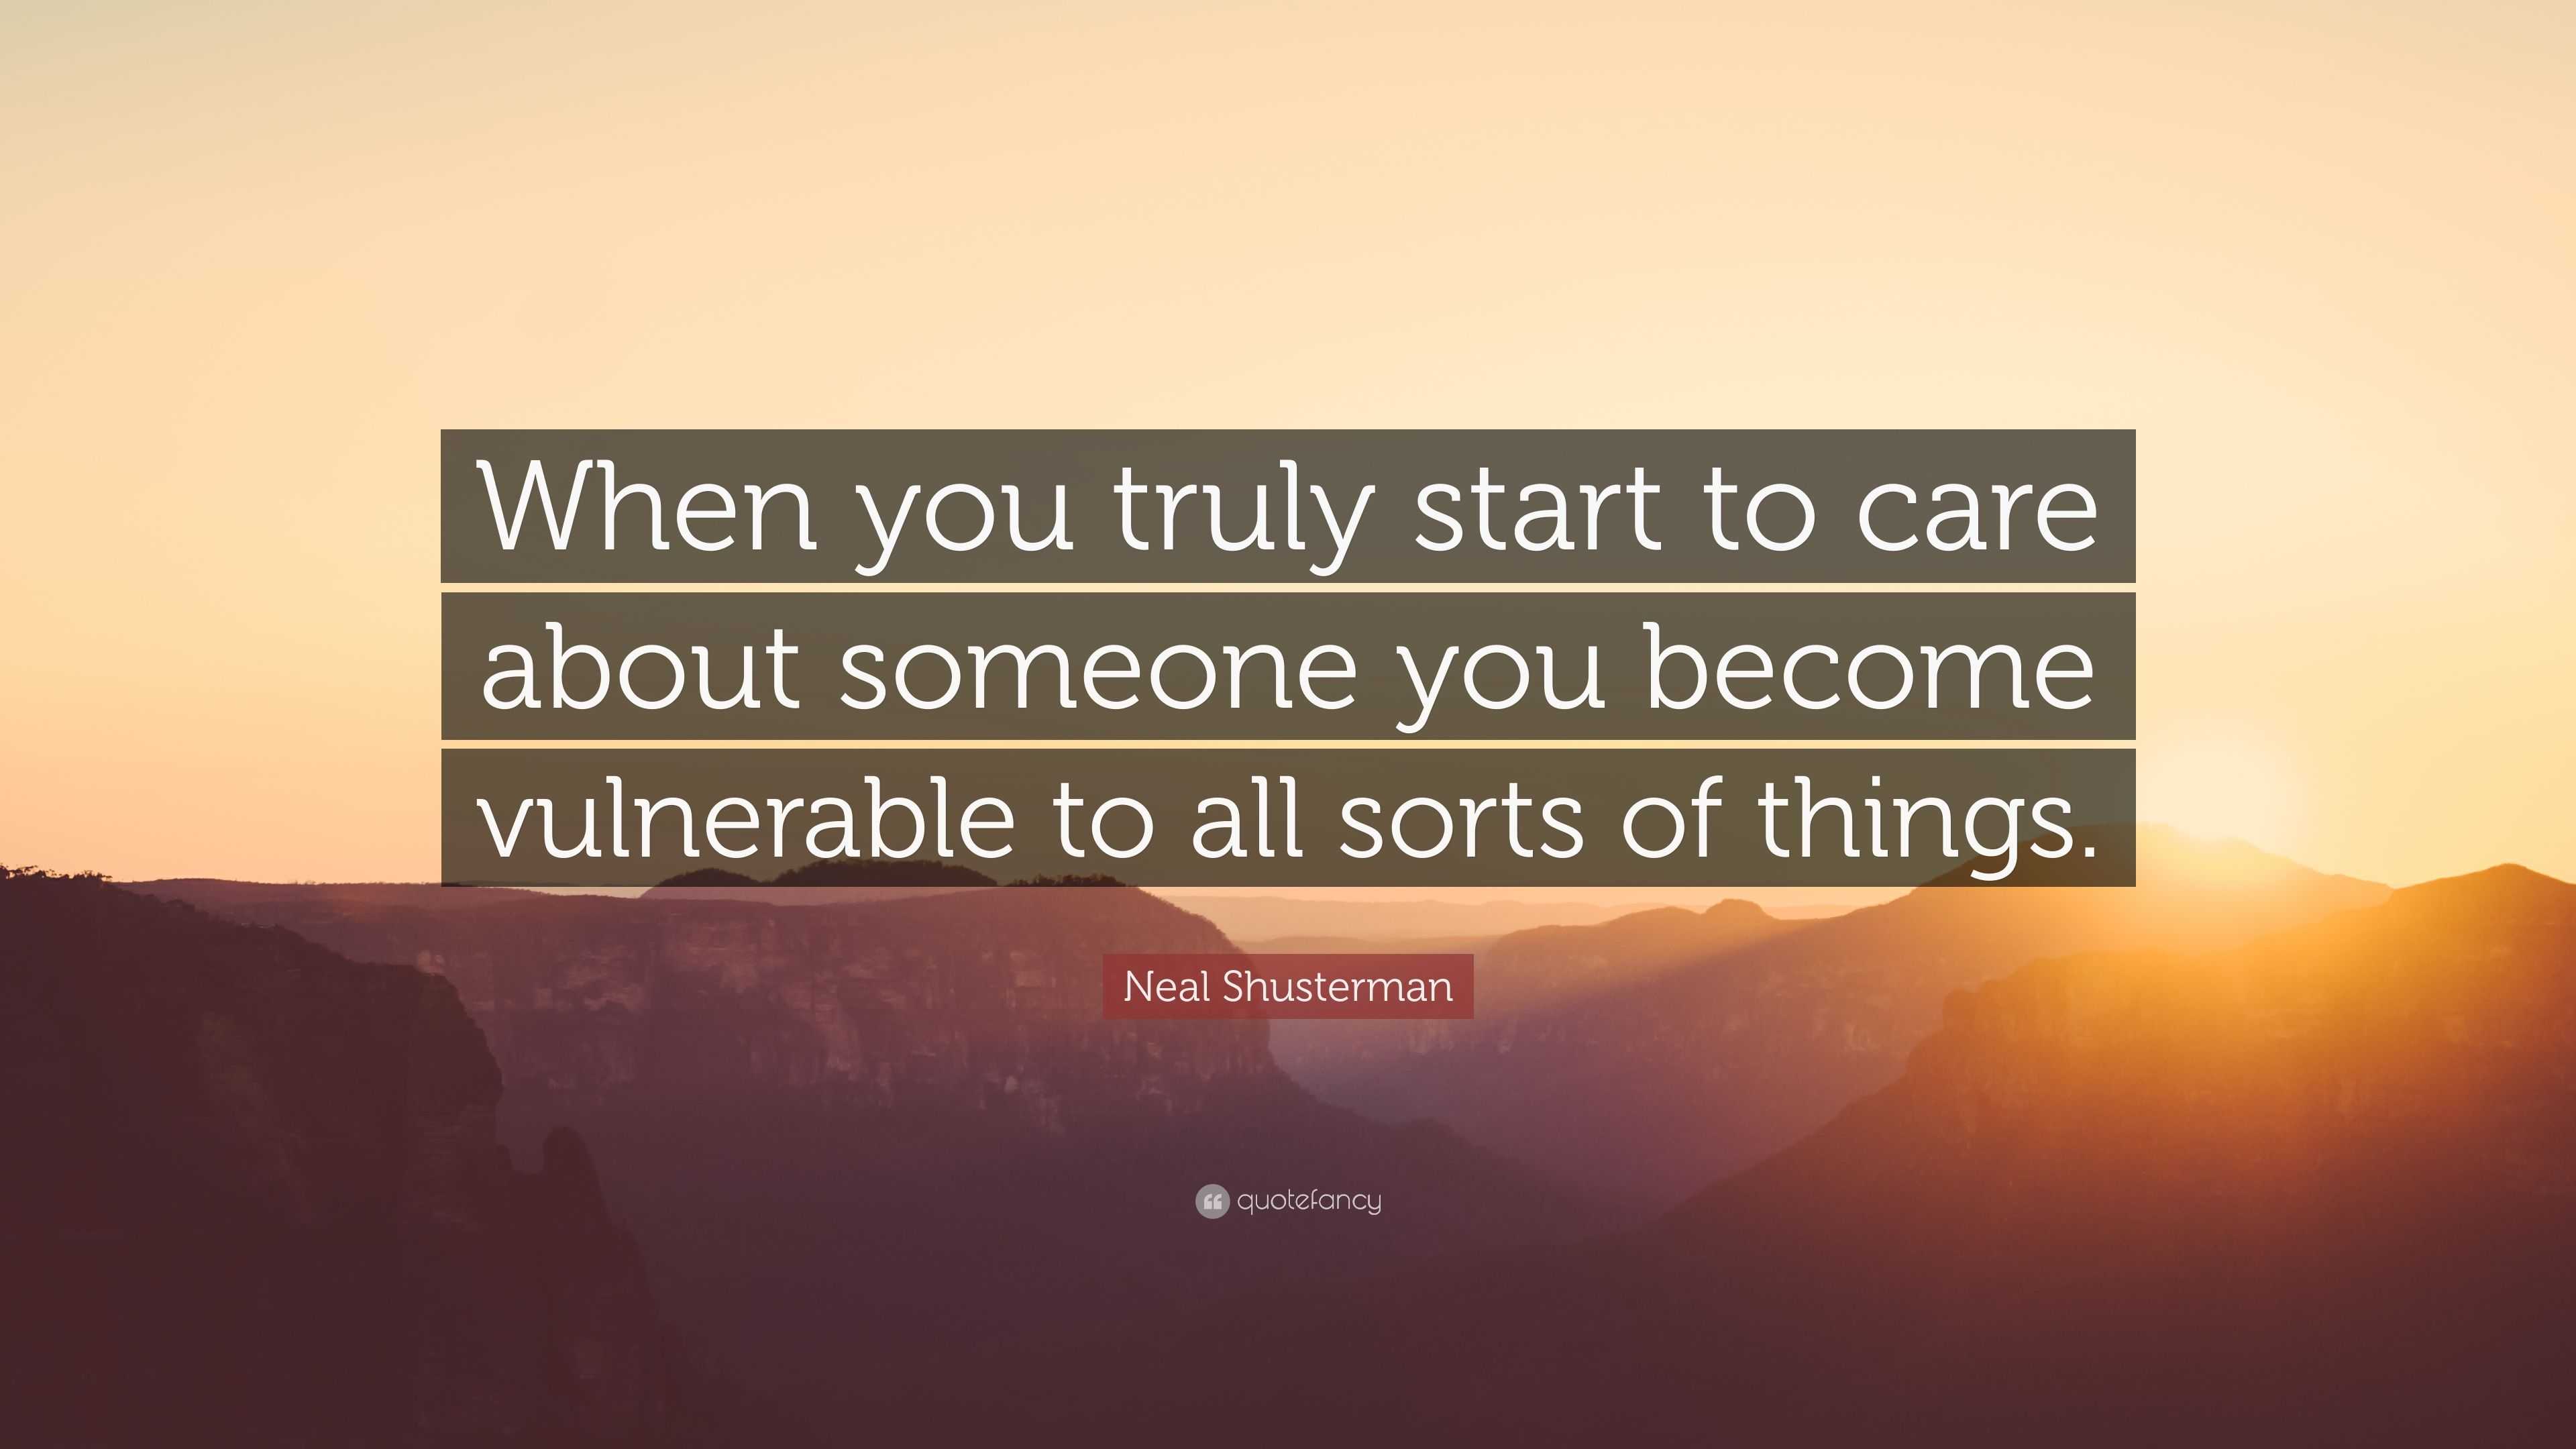 Neal Shusterman Quote: “When you truly start to care about someone you ...